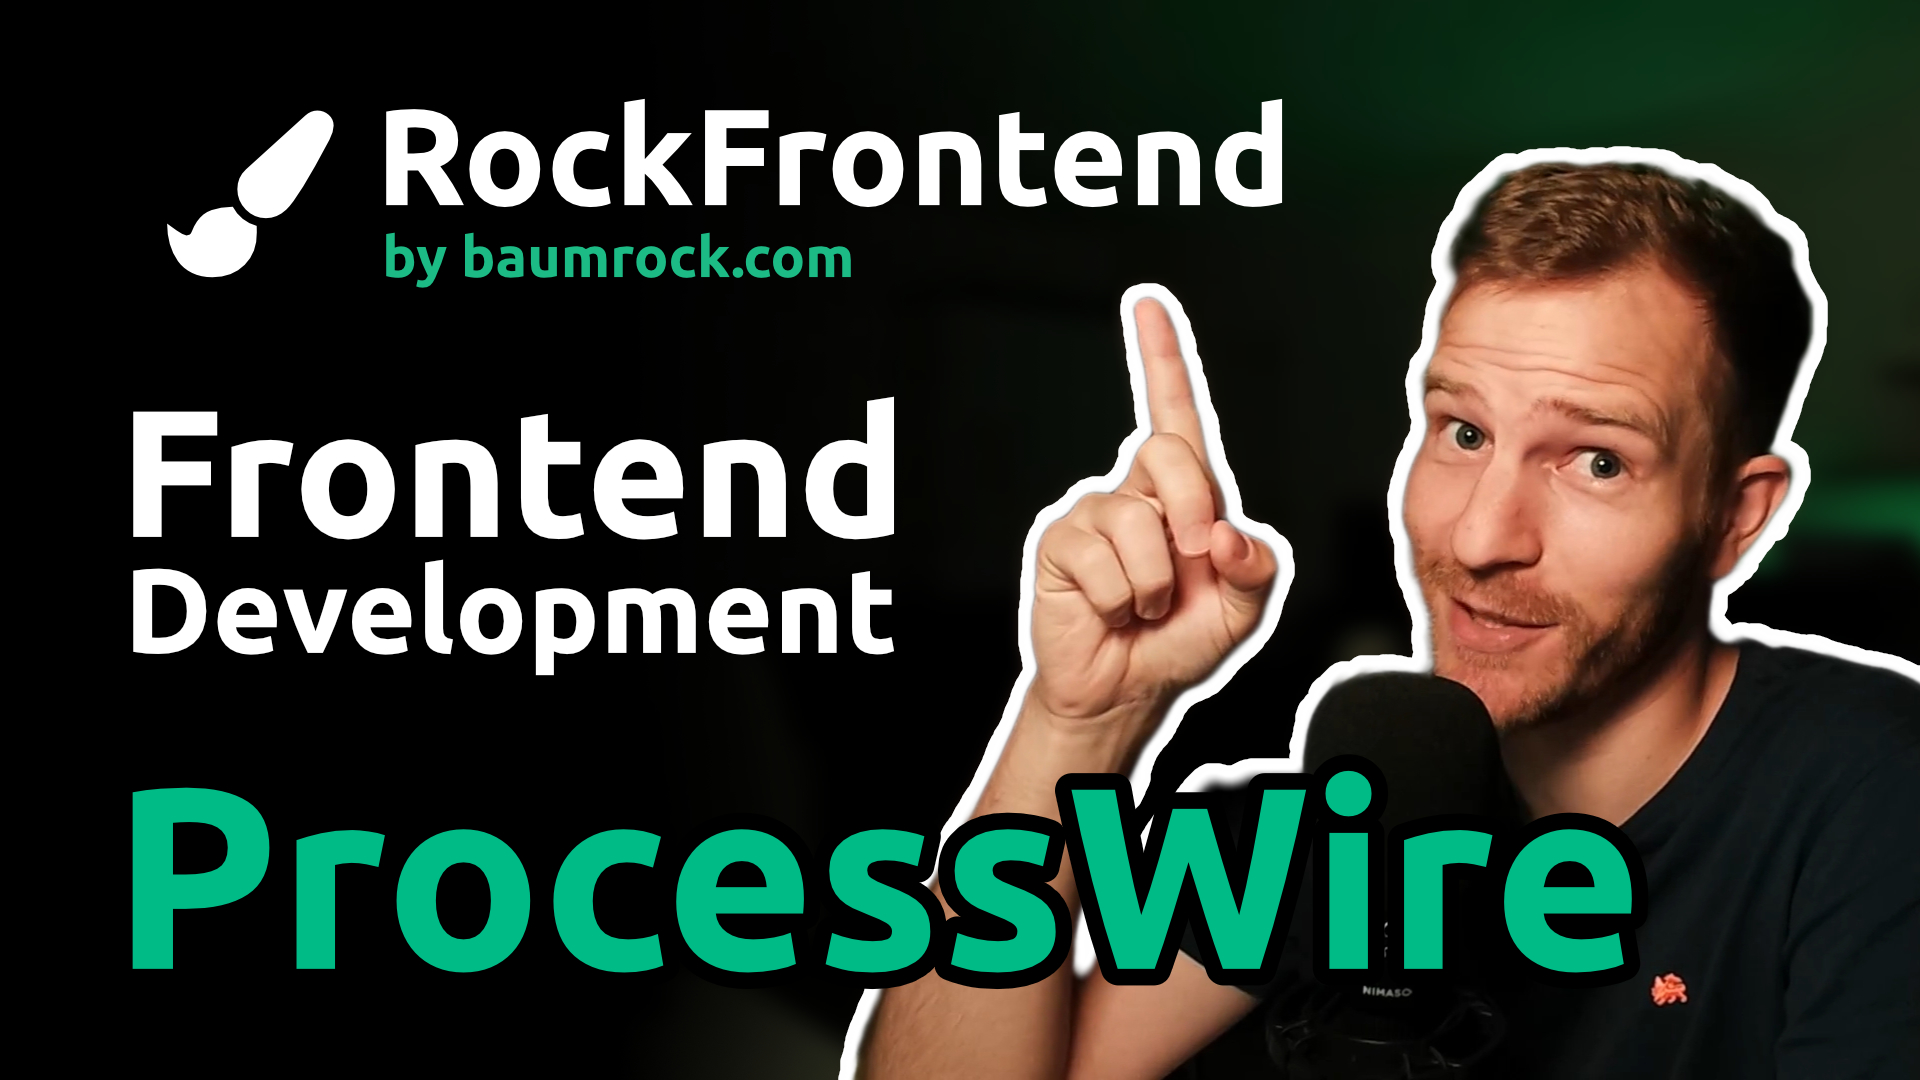 RockFrontend - The Powerful Frontend Development Toolbox for ProcessWire 🚀🚀